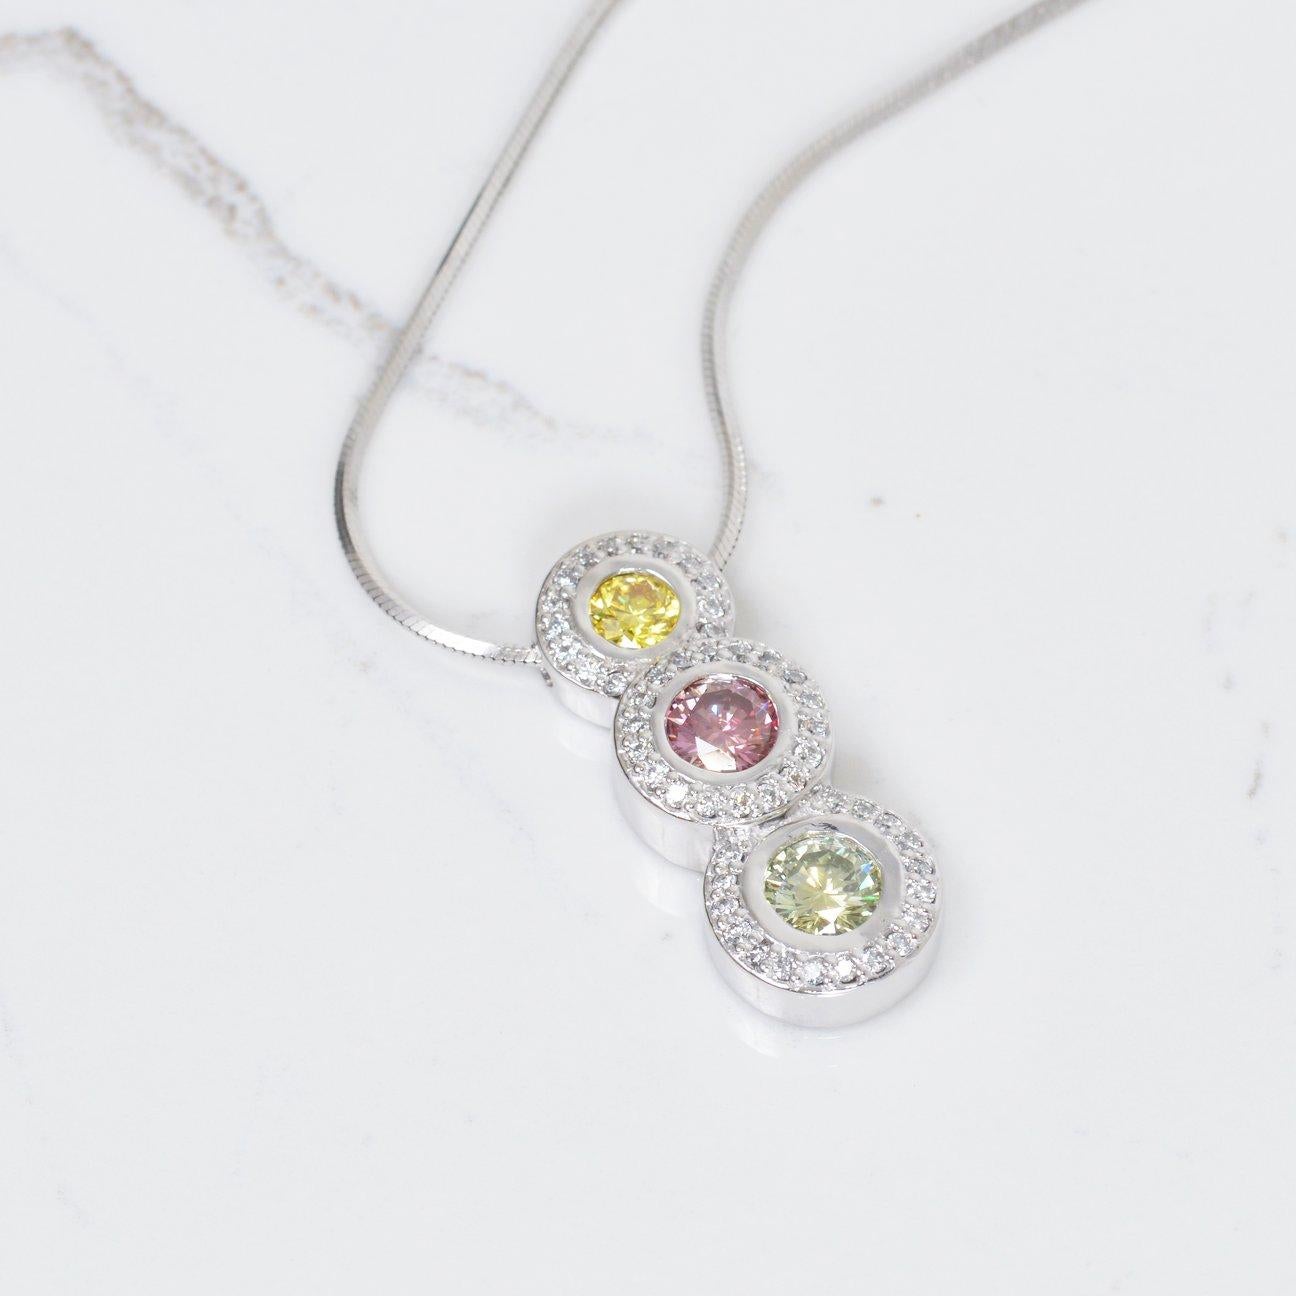 This diamond pendant necklace is truly eye catching! These color enhanced diamonds are absolutlely beautiful. The yellow diamond is .25 carats, purple diamond is .50 carats, and the green diamond is .52 carats. Surrounding these stones is .50 carats